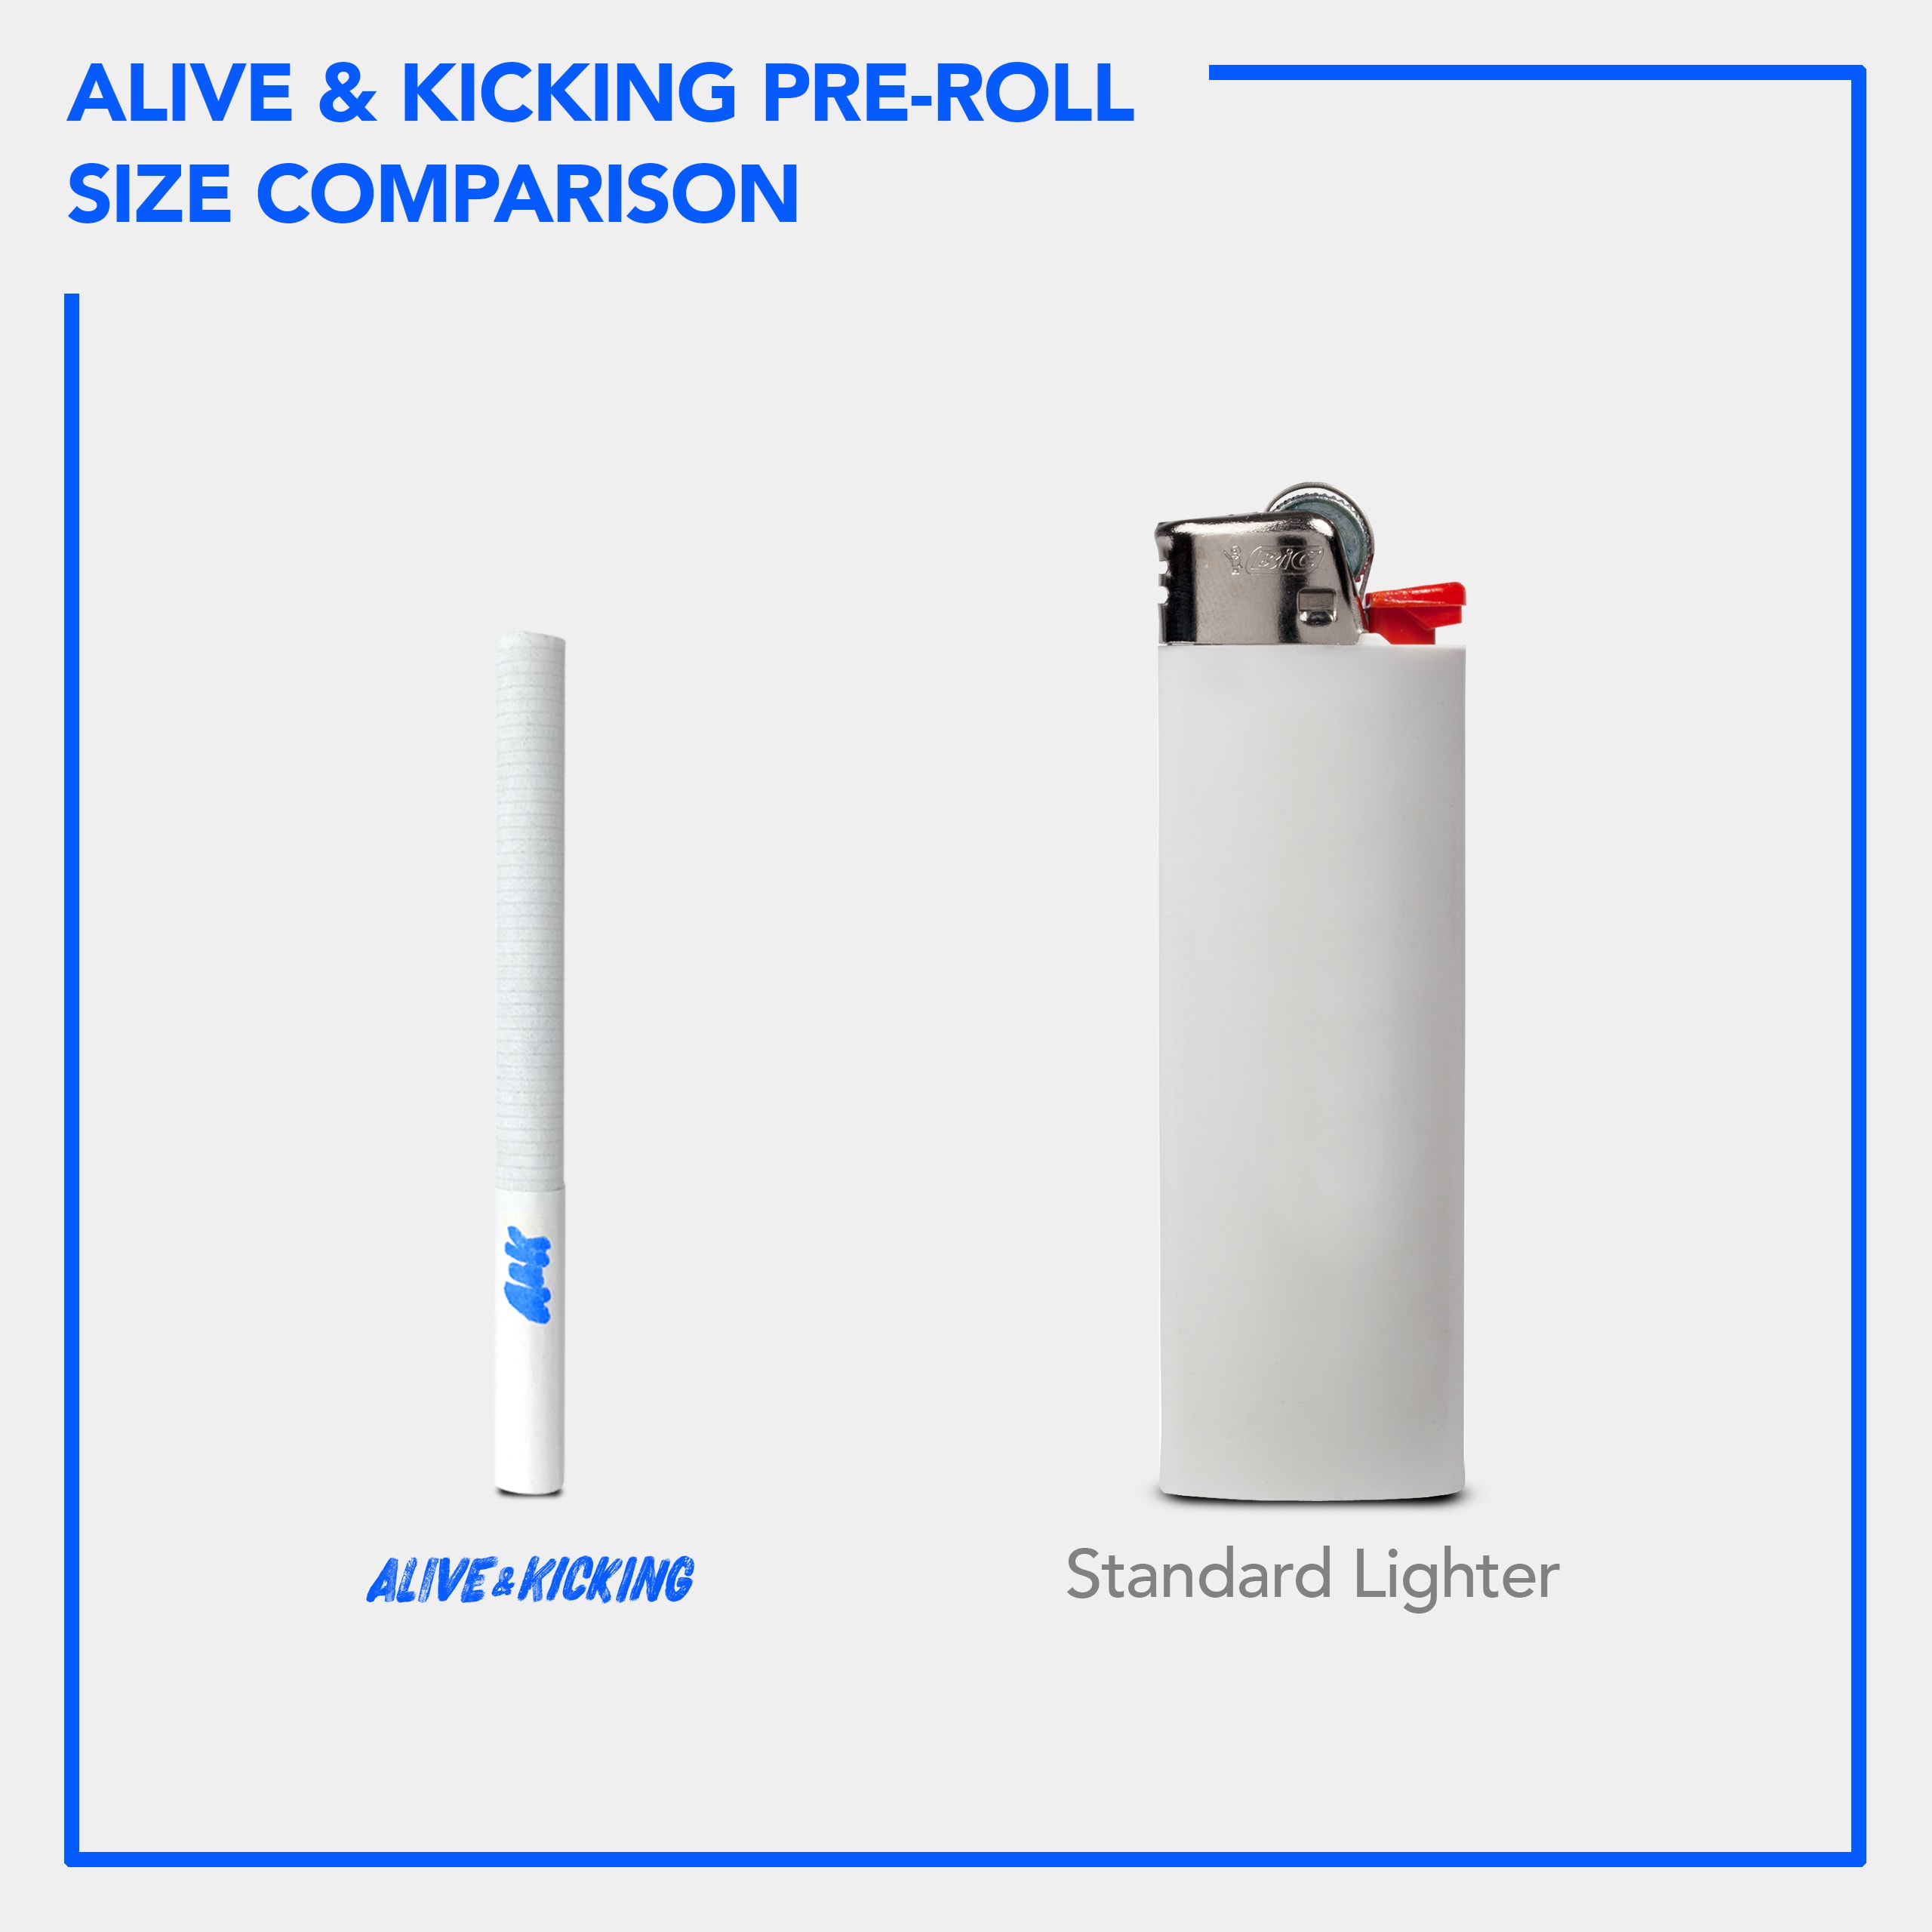 The front of a pack of Alive & Kicking Super Slim CBD Cigarettes